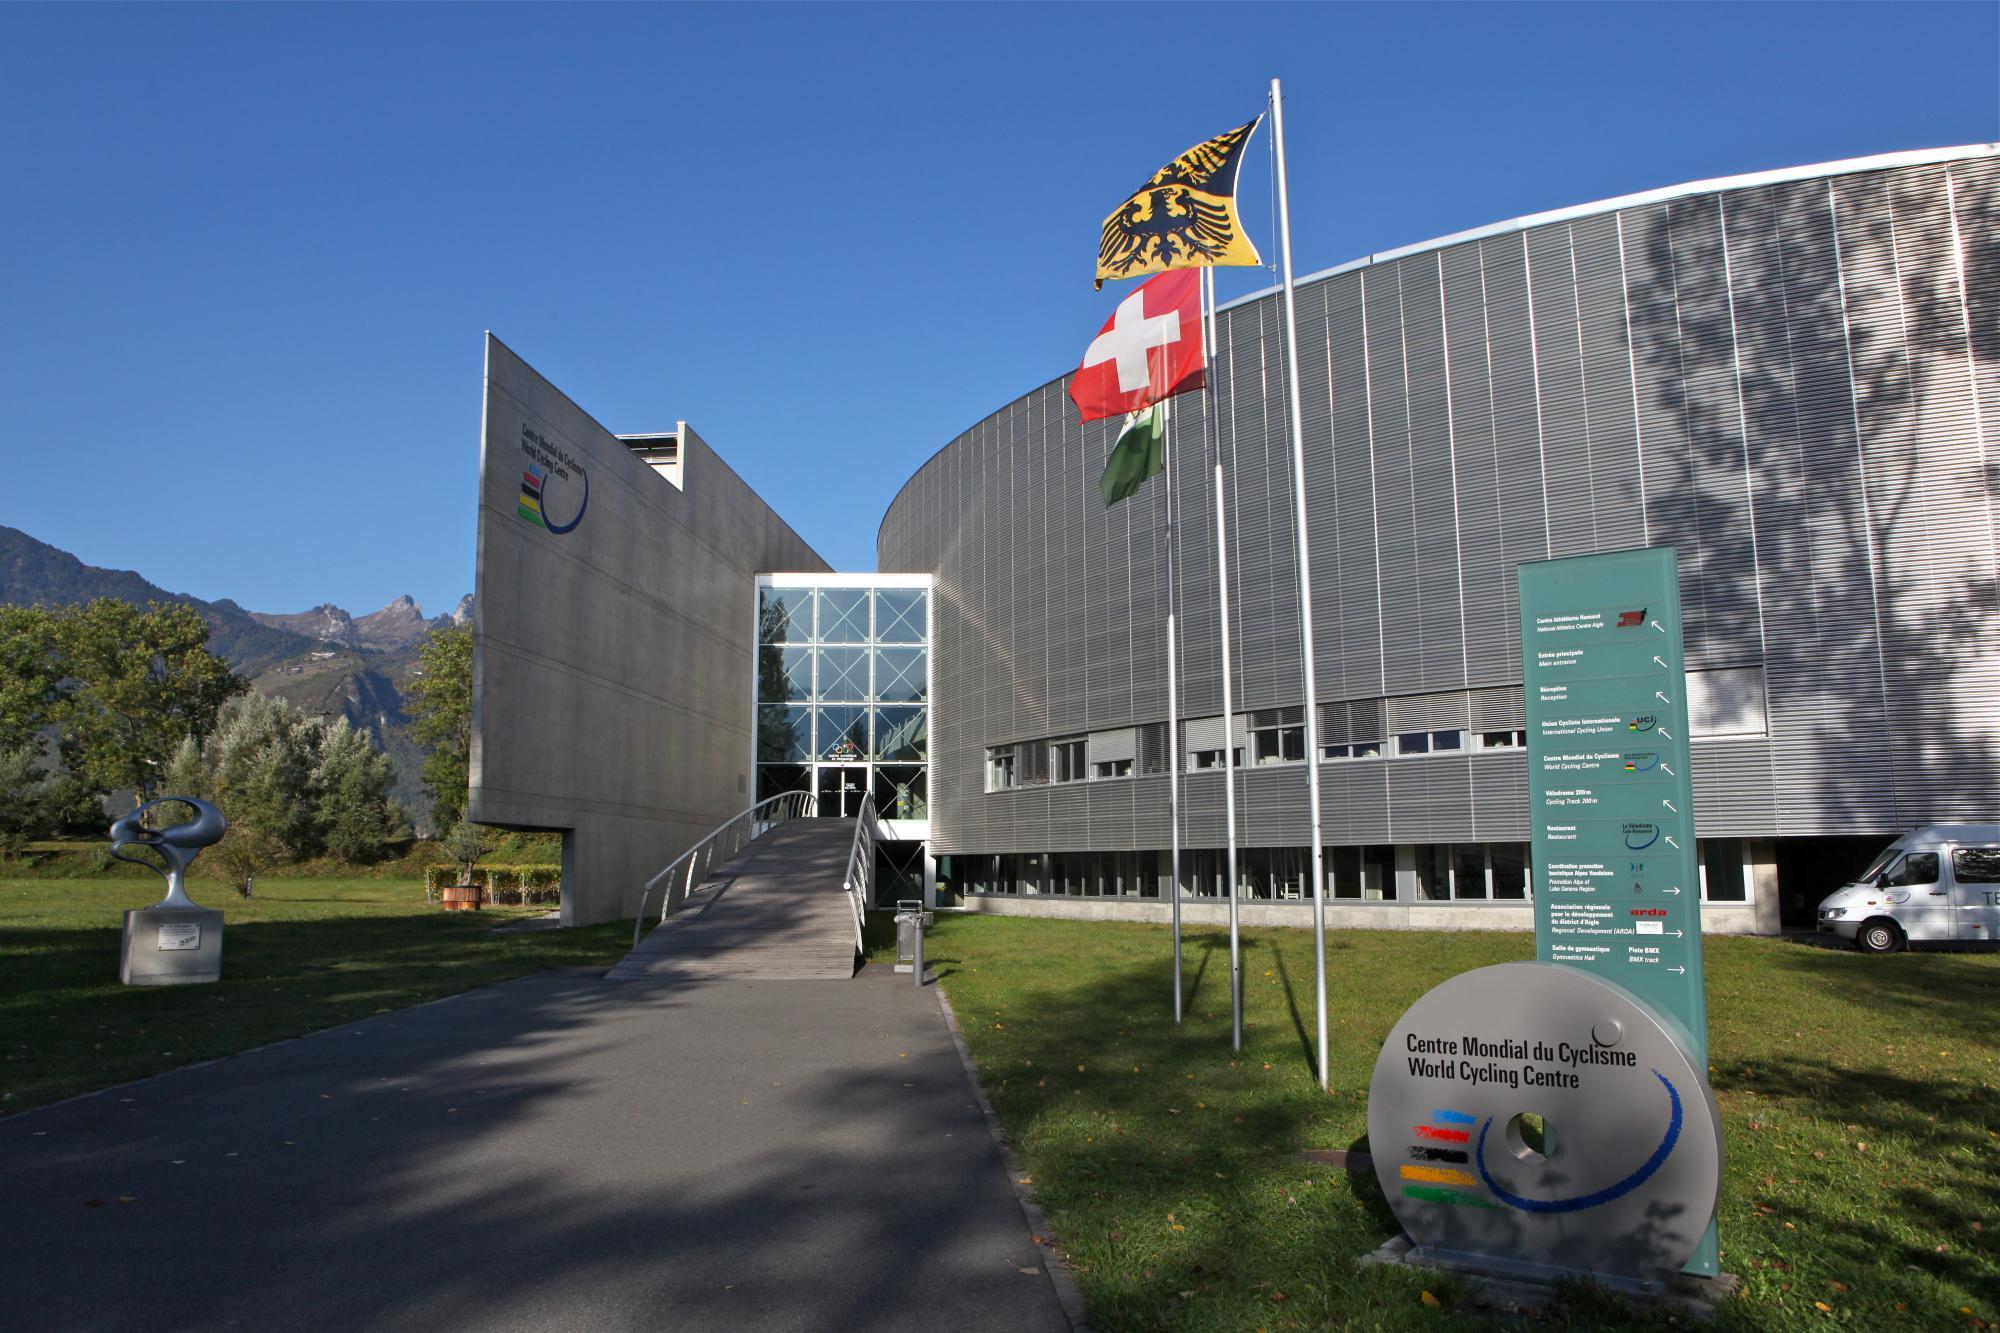 World Cycling Centre building - summer - Aigle